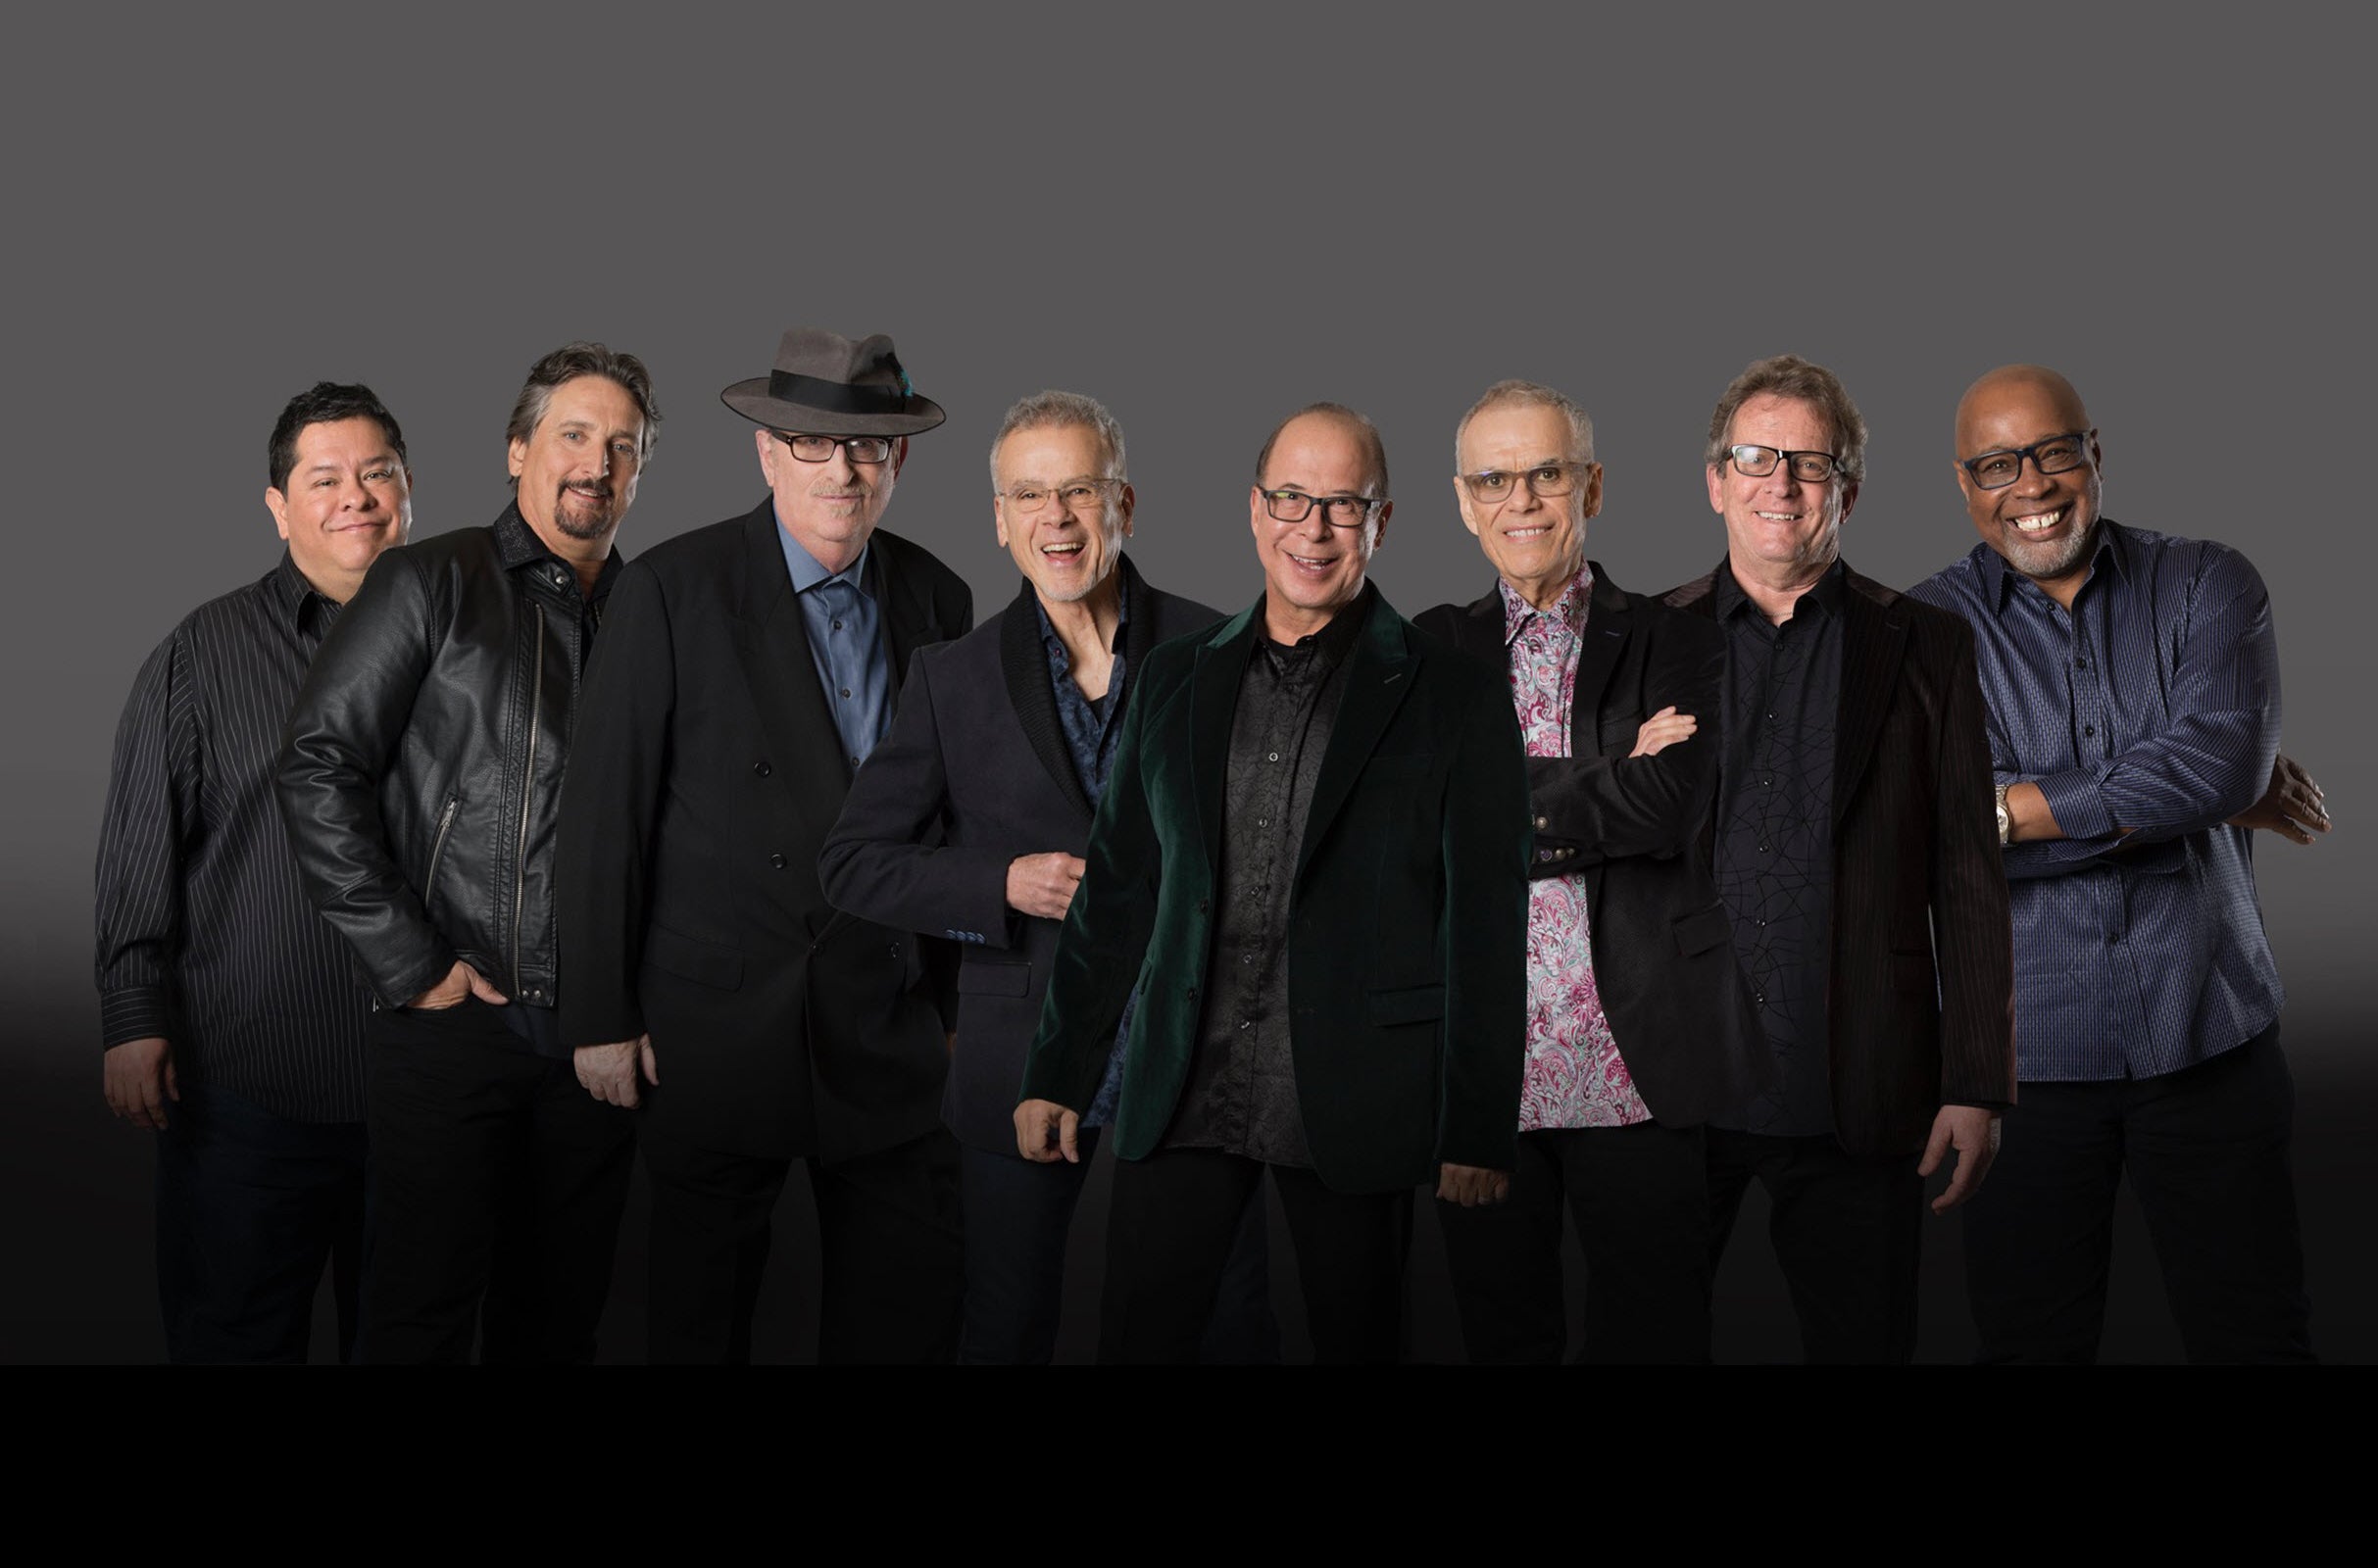 Tower of Power presale code for performance tickets in Lynn, MA (Lynn Auditorium)